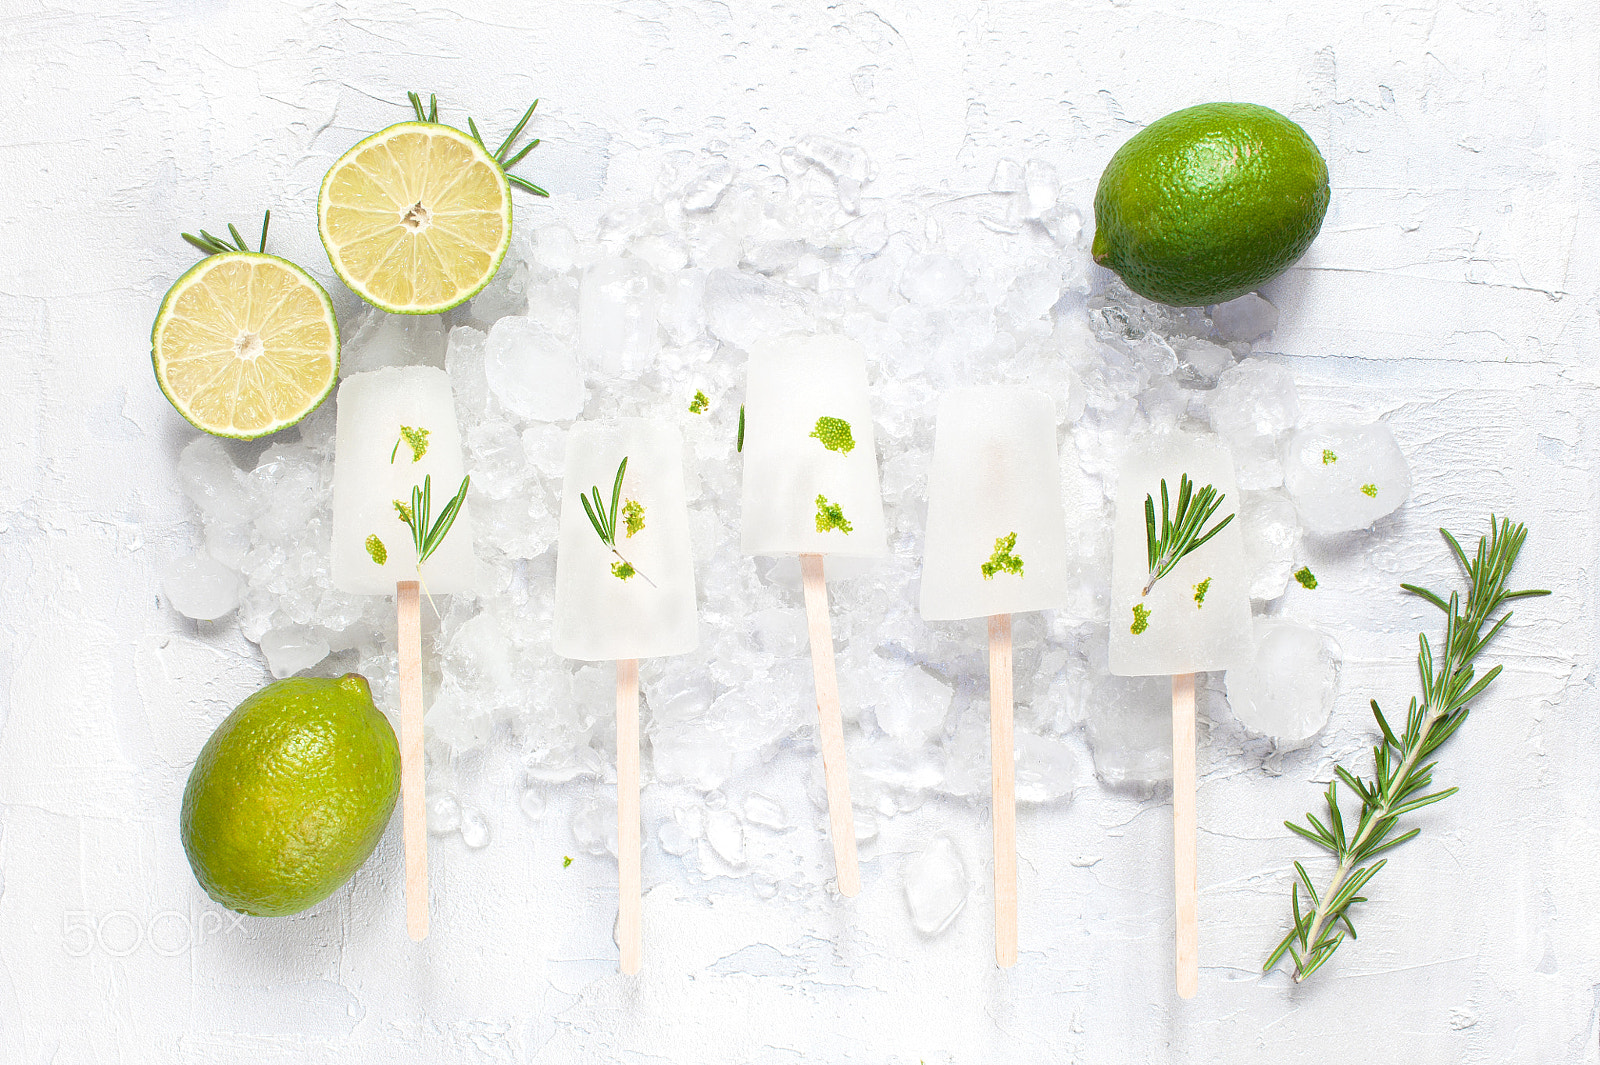 Nikon D700 sample photo. Lime lollies with zest, limes and rosemary on the ice photography